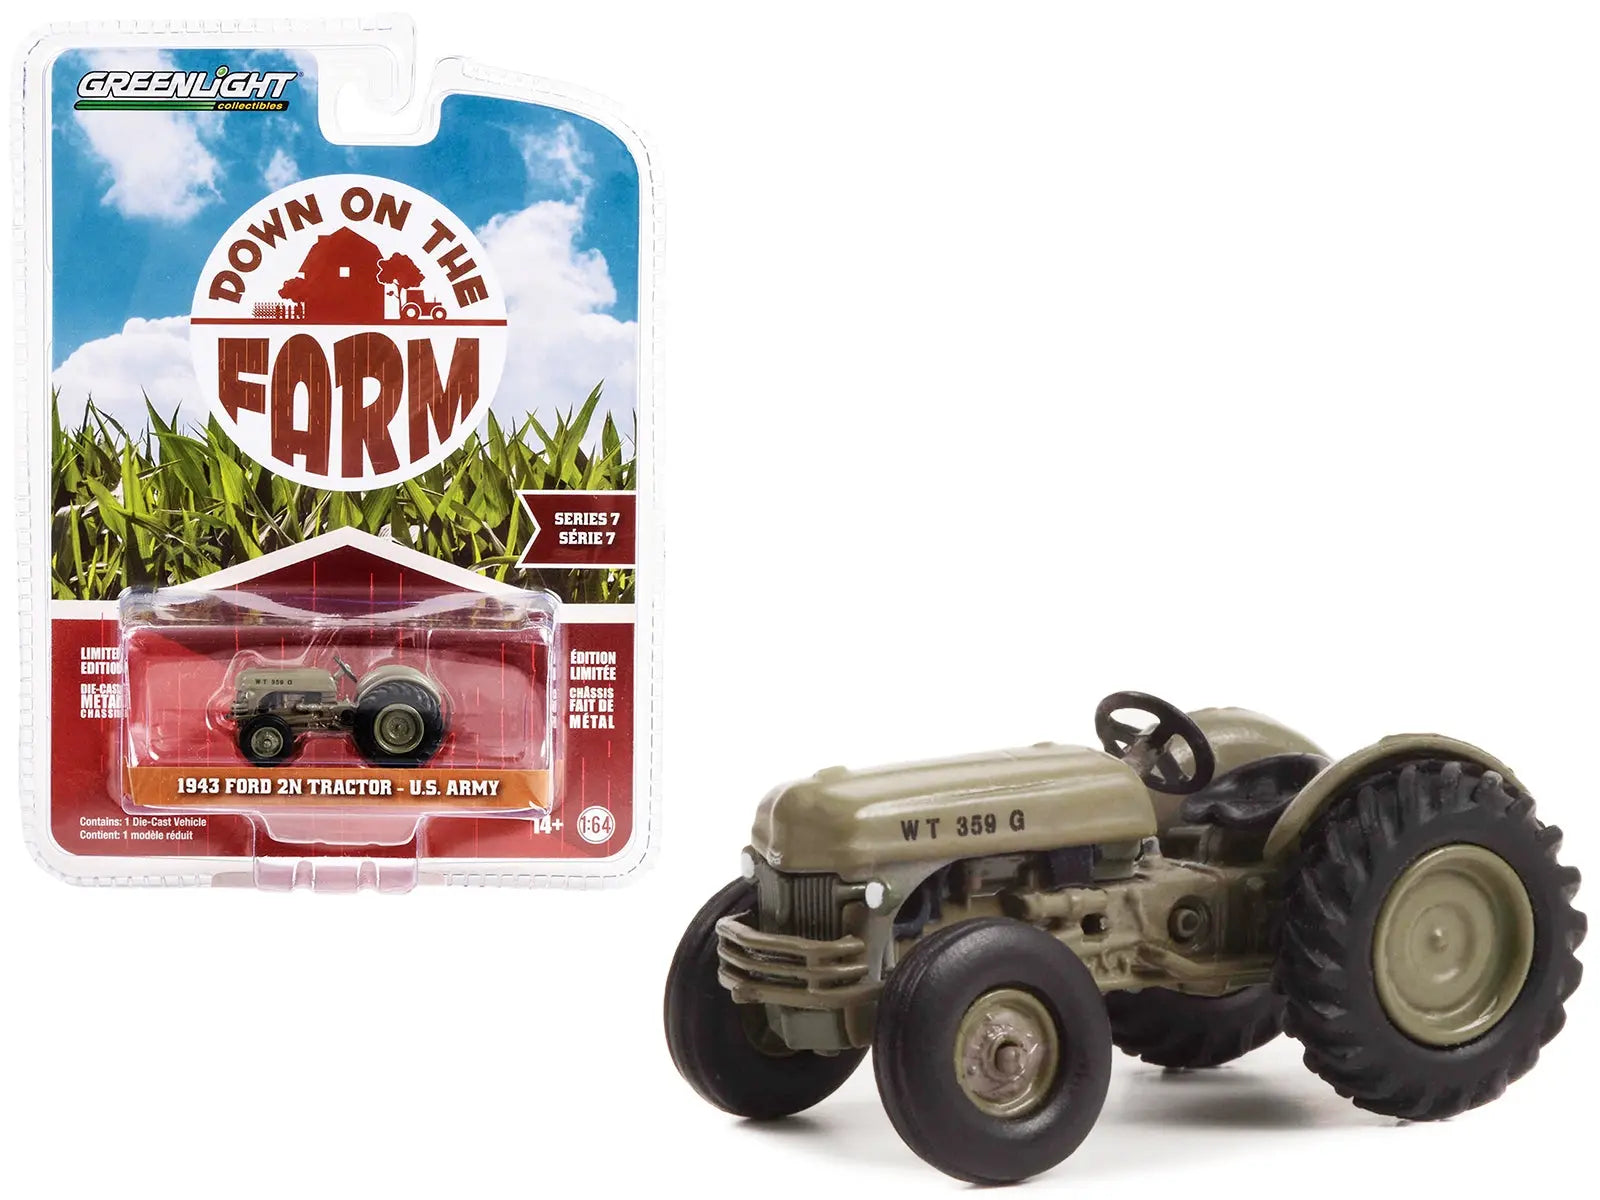 1943 Ford 2N Tractor Brown "U.S. Army" "Down on the Farm" Series 7 1/64 Diecast Model by Greenlight Greenlight